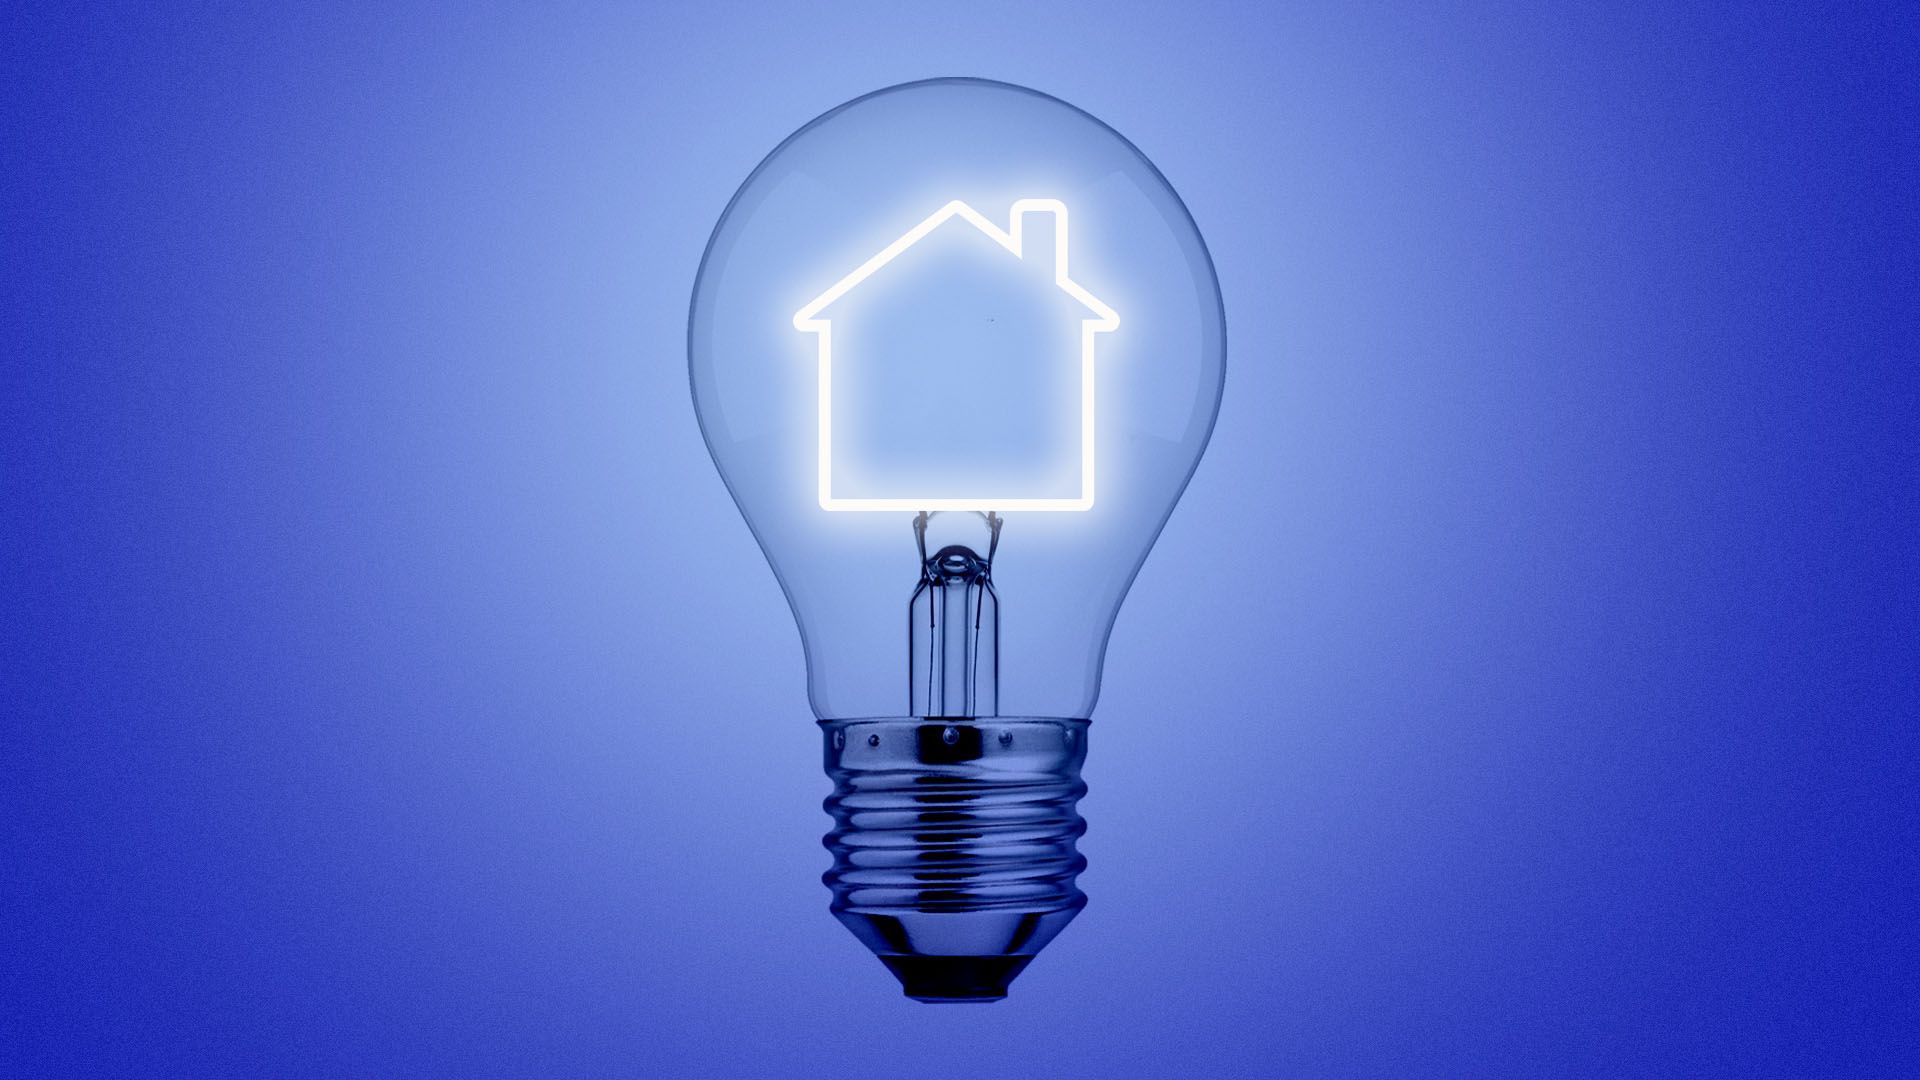 Illustration of a lightbulb with a house-shaped filament 